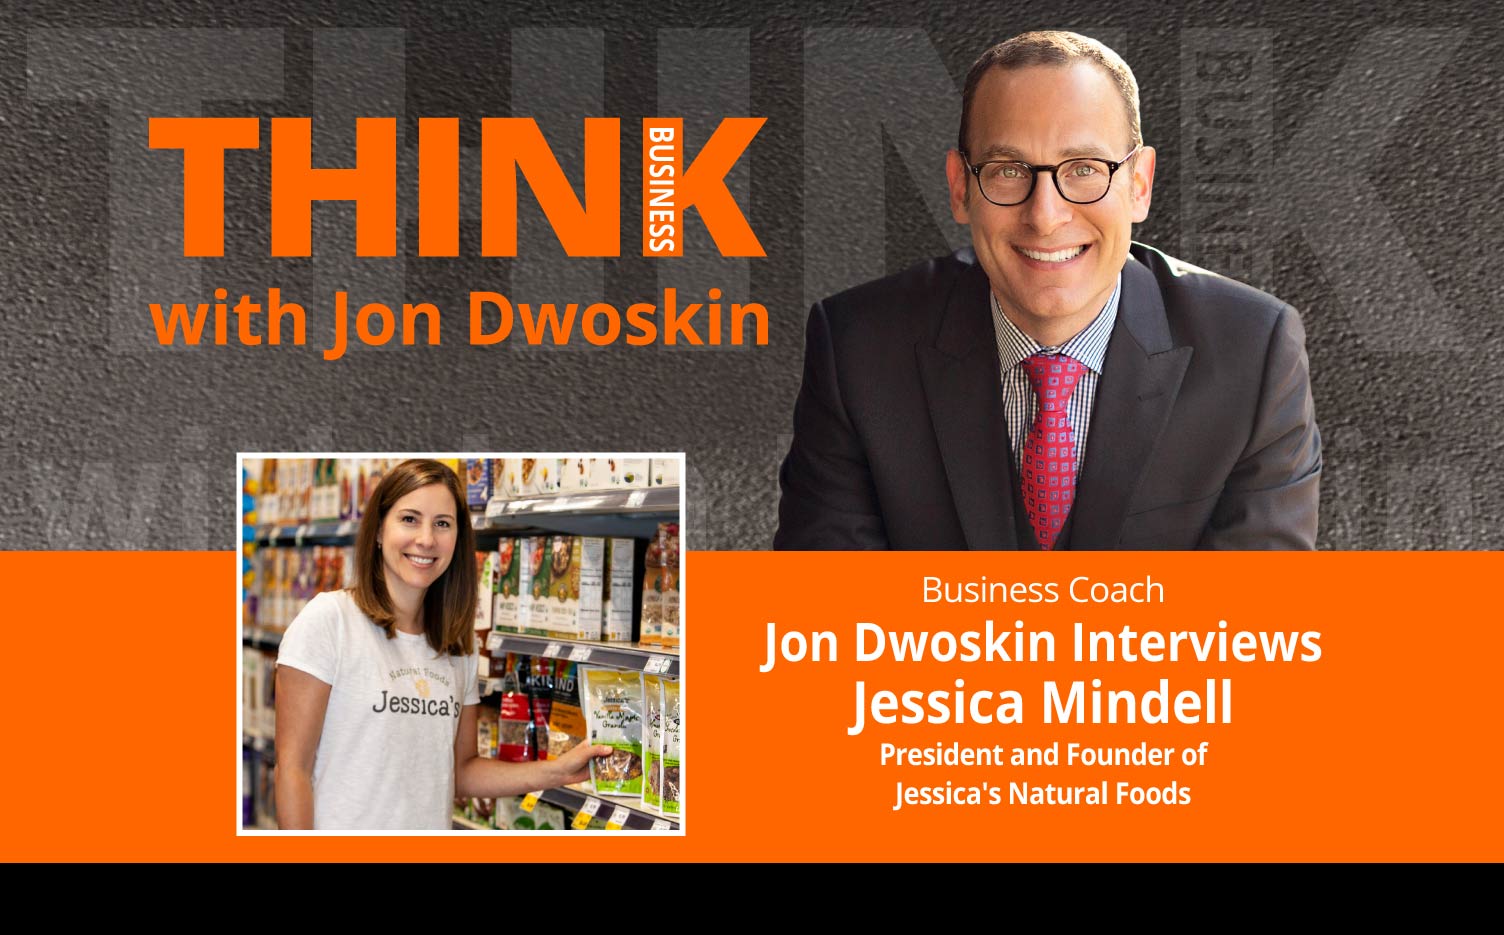 THINK Business Podcast: Jon Dwoskin Interviews Jessica Mindell, President and Founder of Jessica's Natural Foods